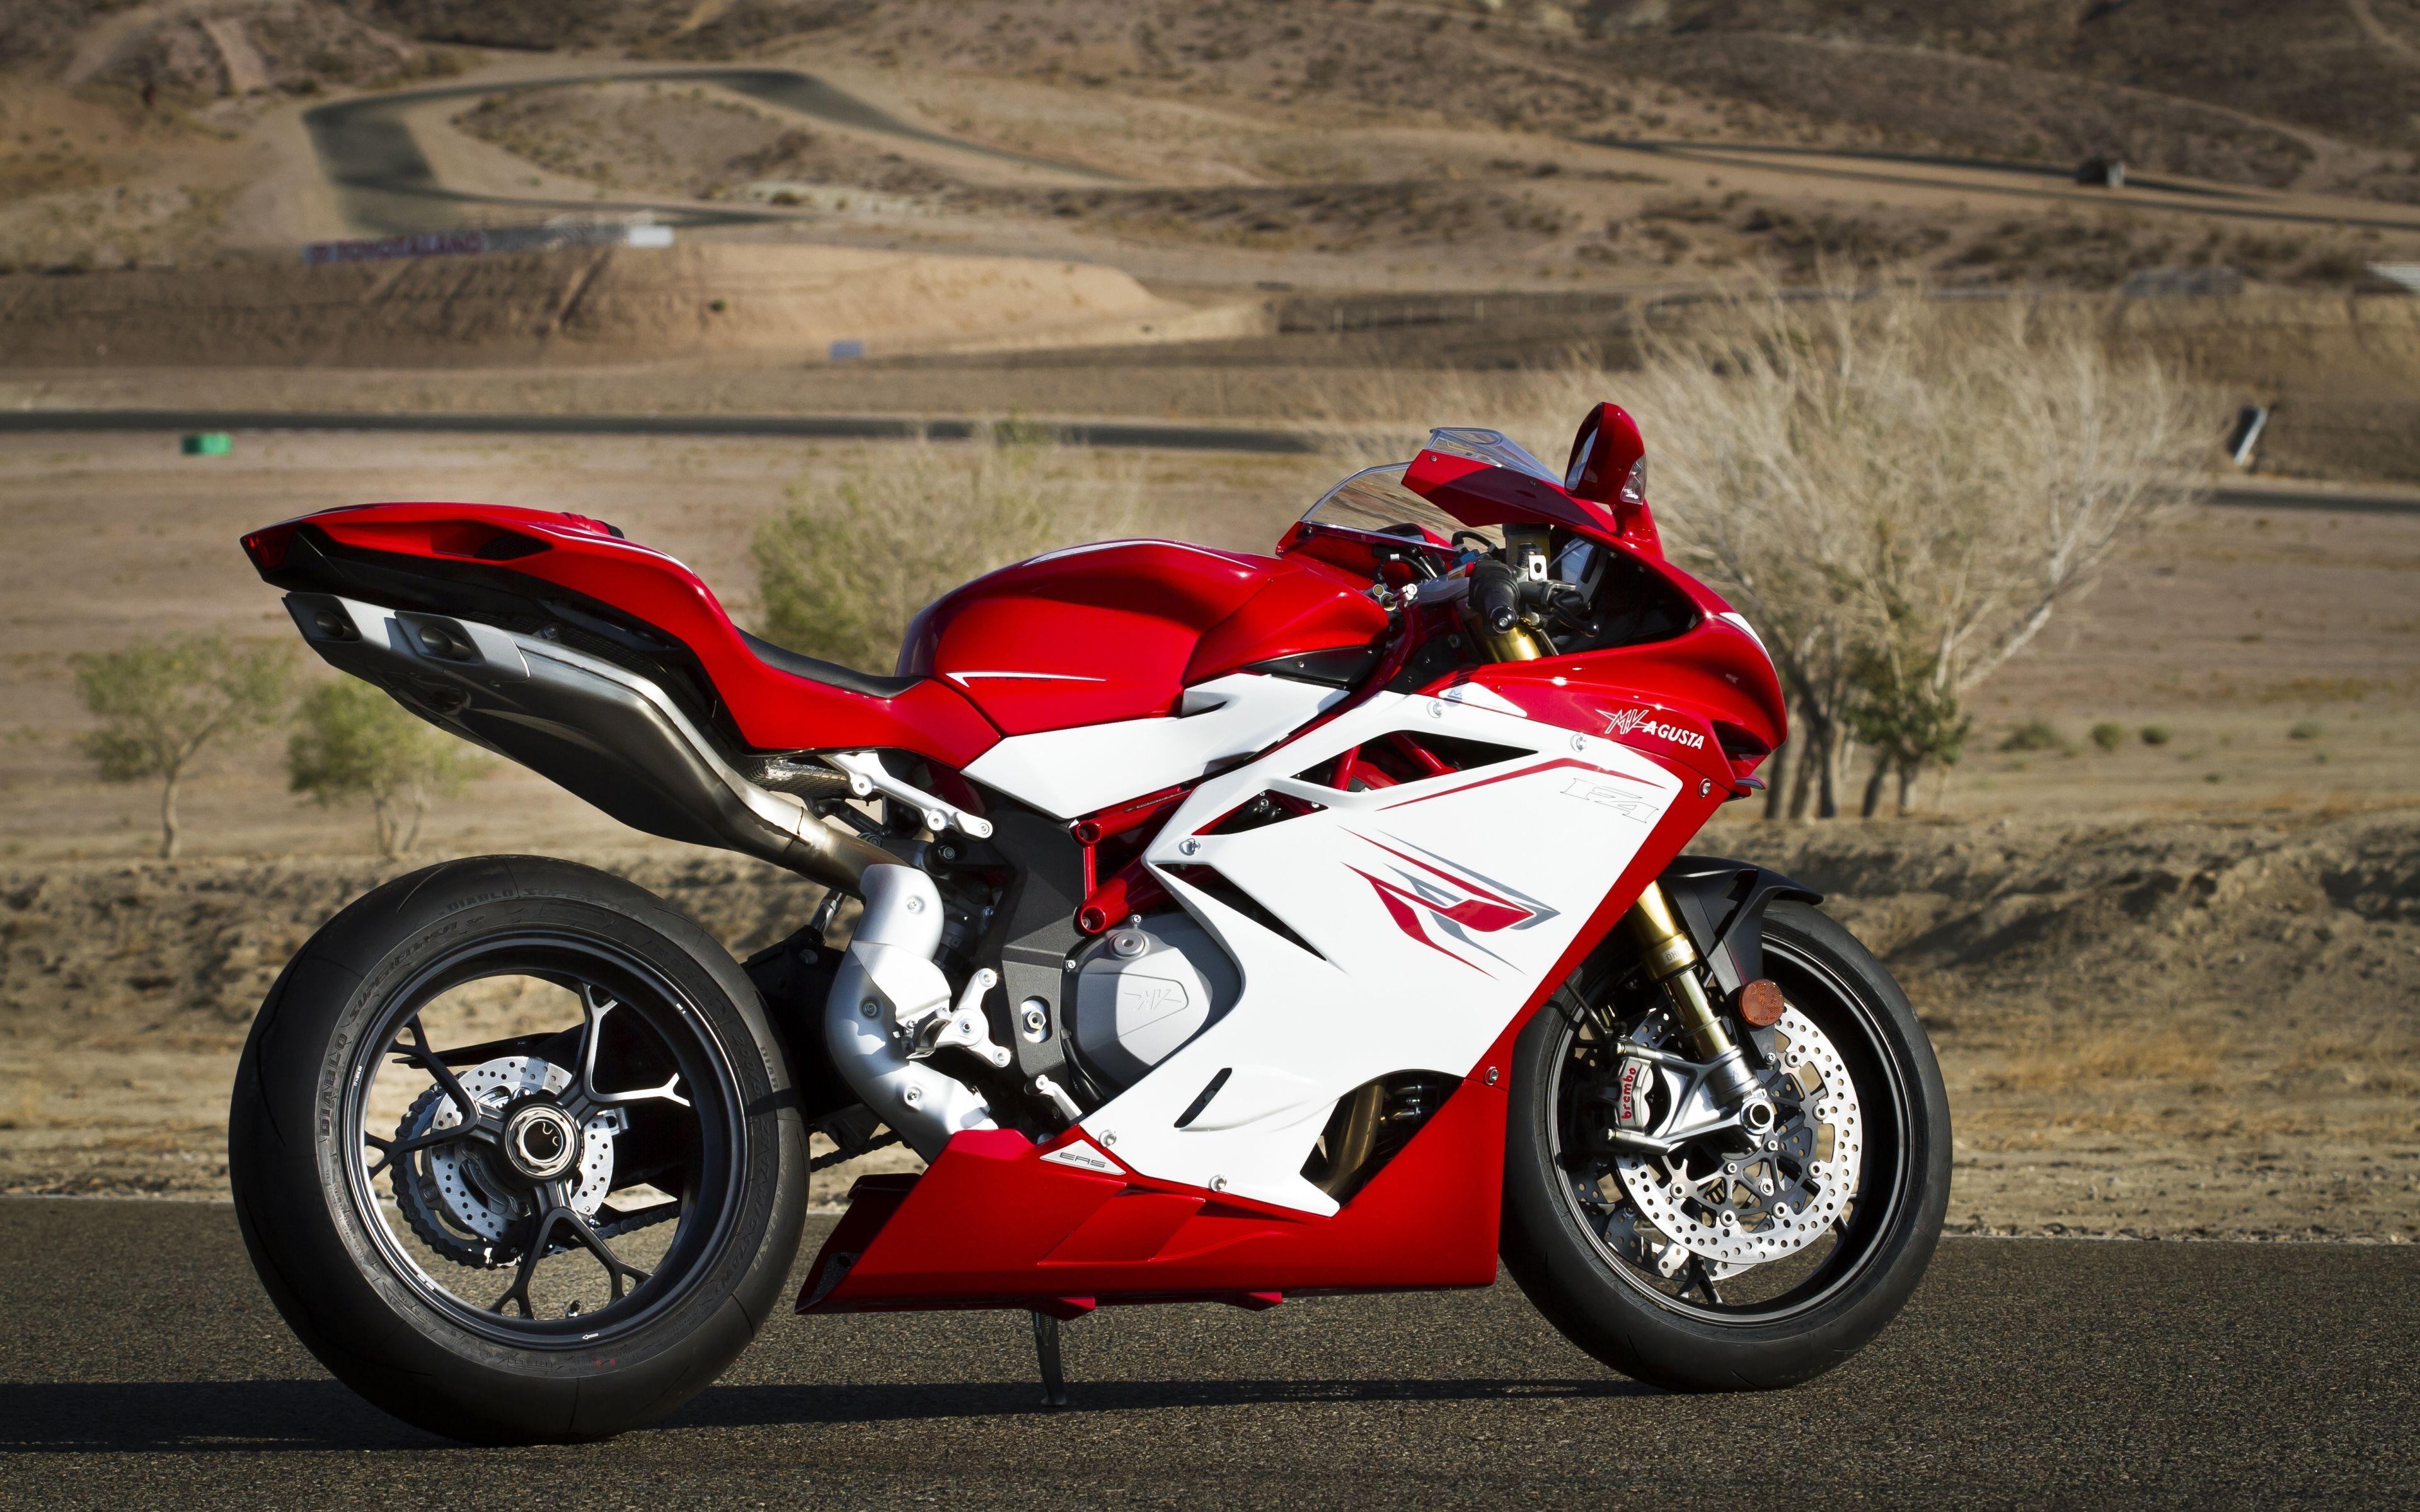 Download Wallpaper 3840x2400 Mv agusta, F Motorcycle, Side, Red